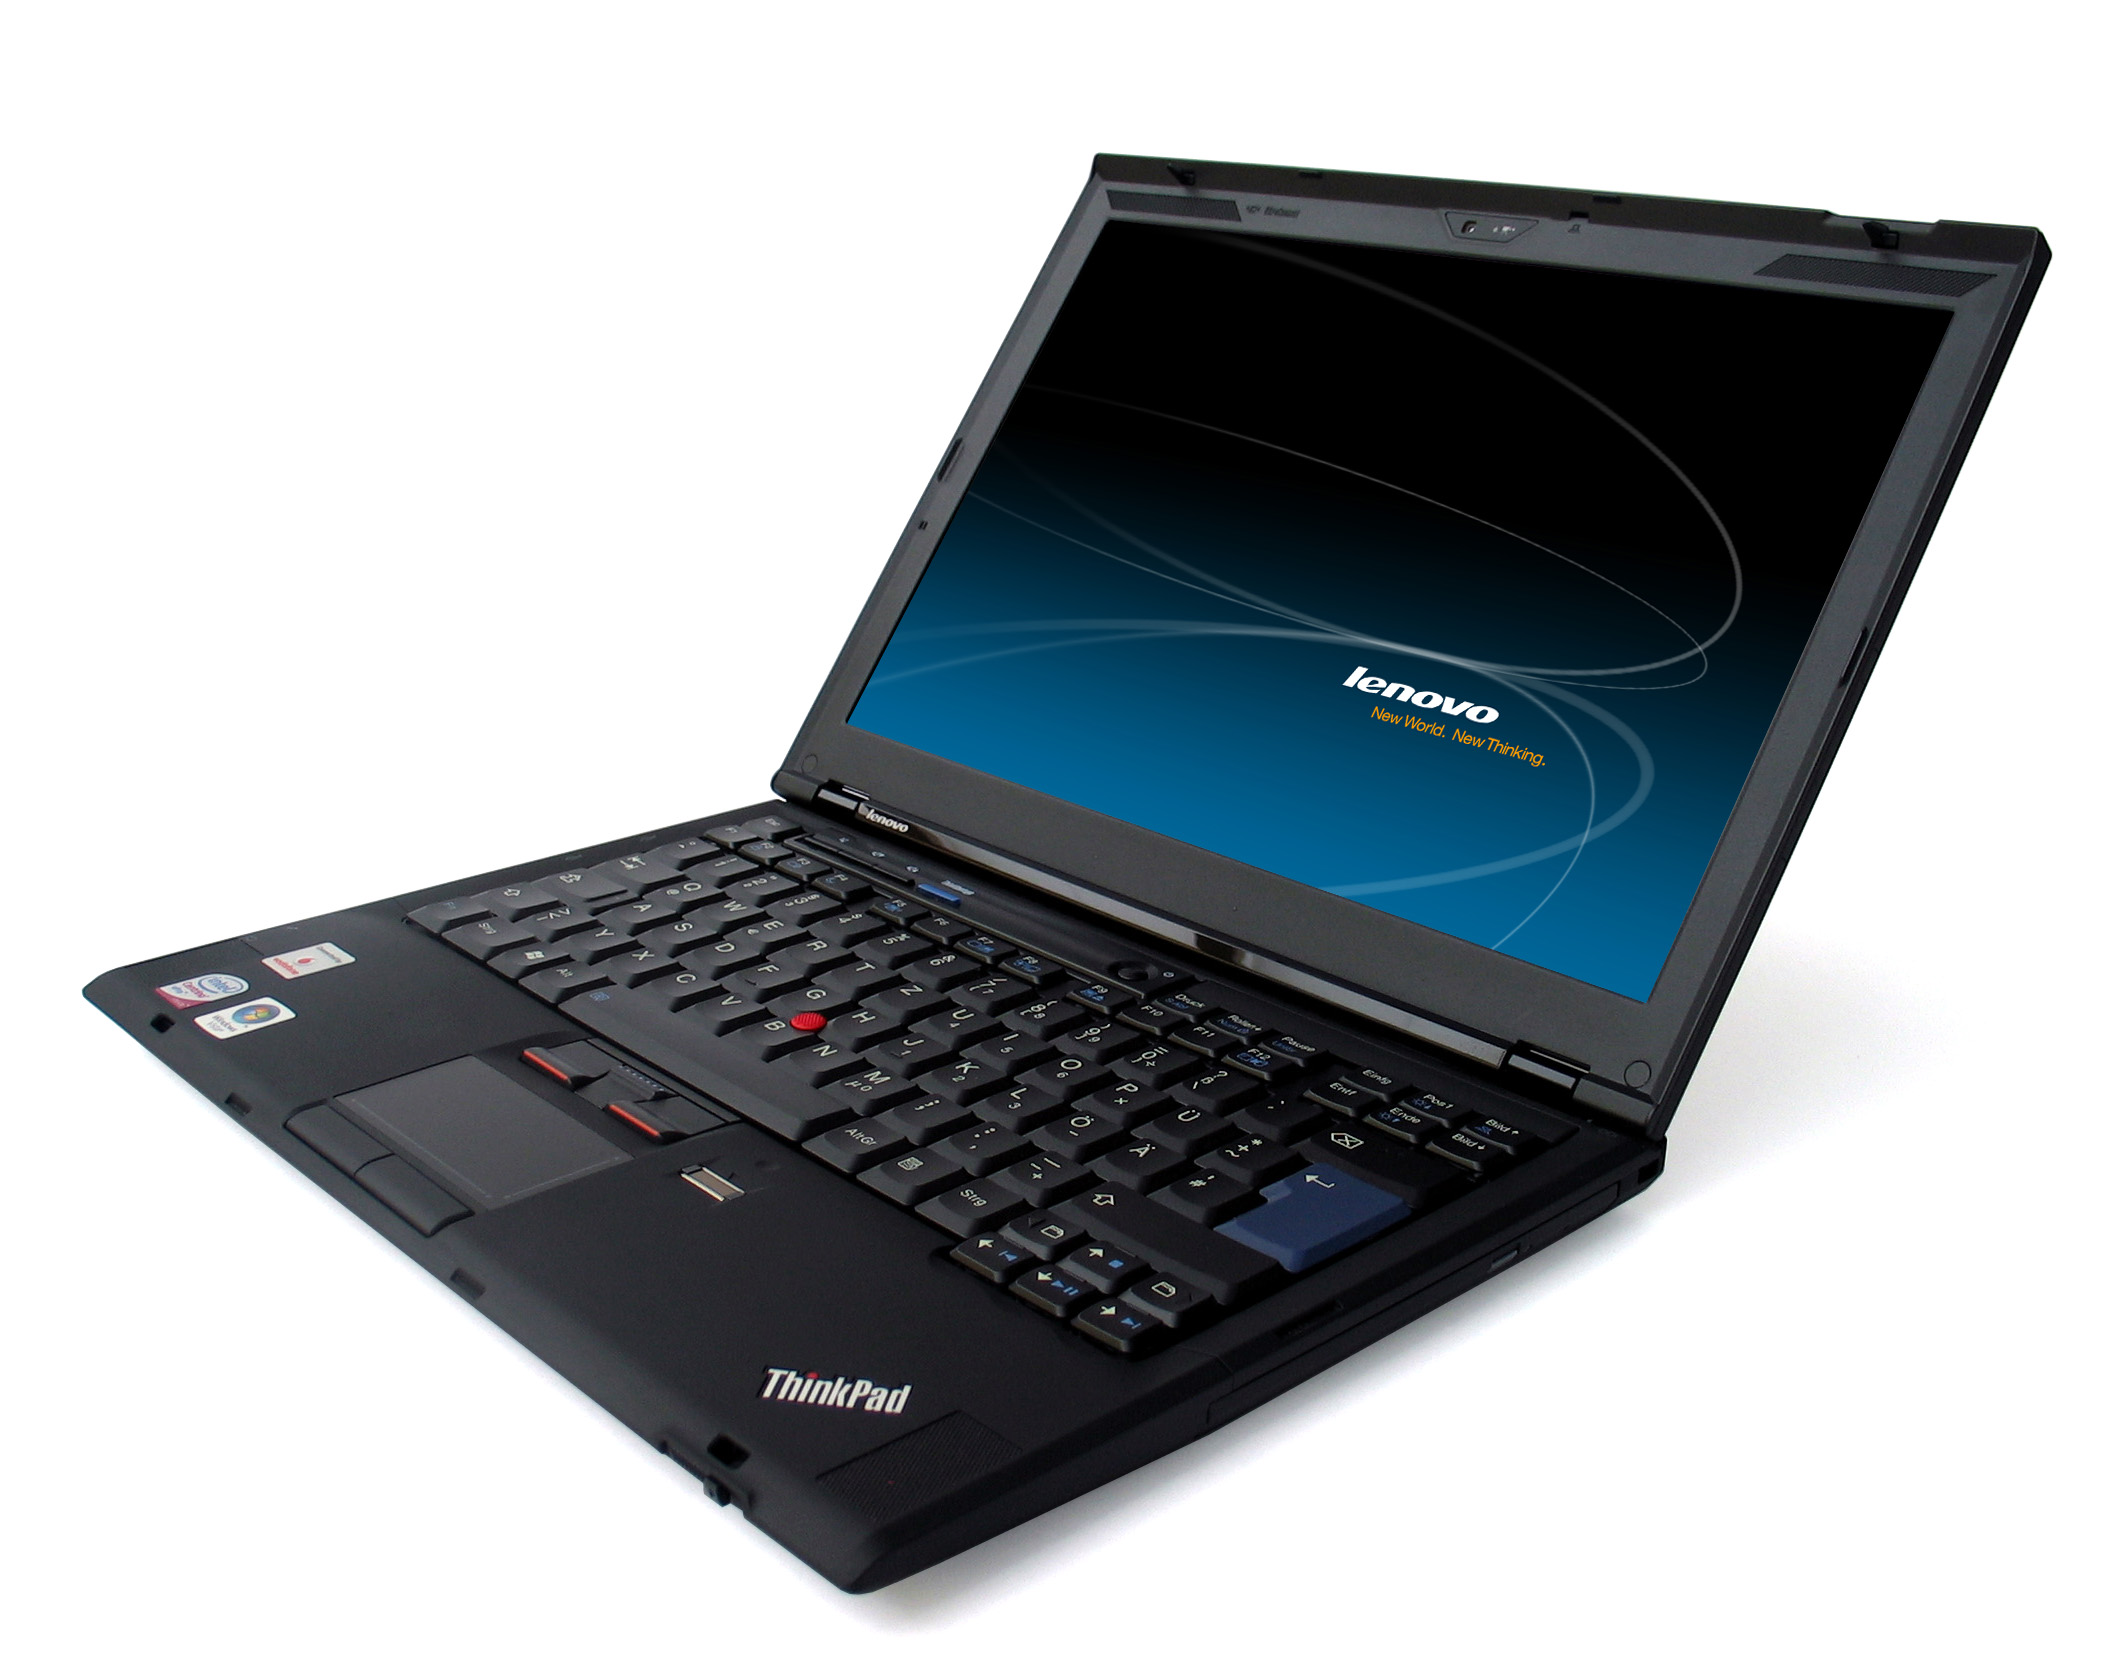 Lenovo thinkpad support drivers xxx playing cards